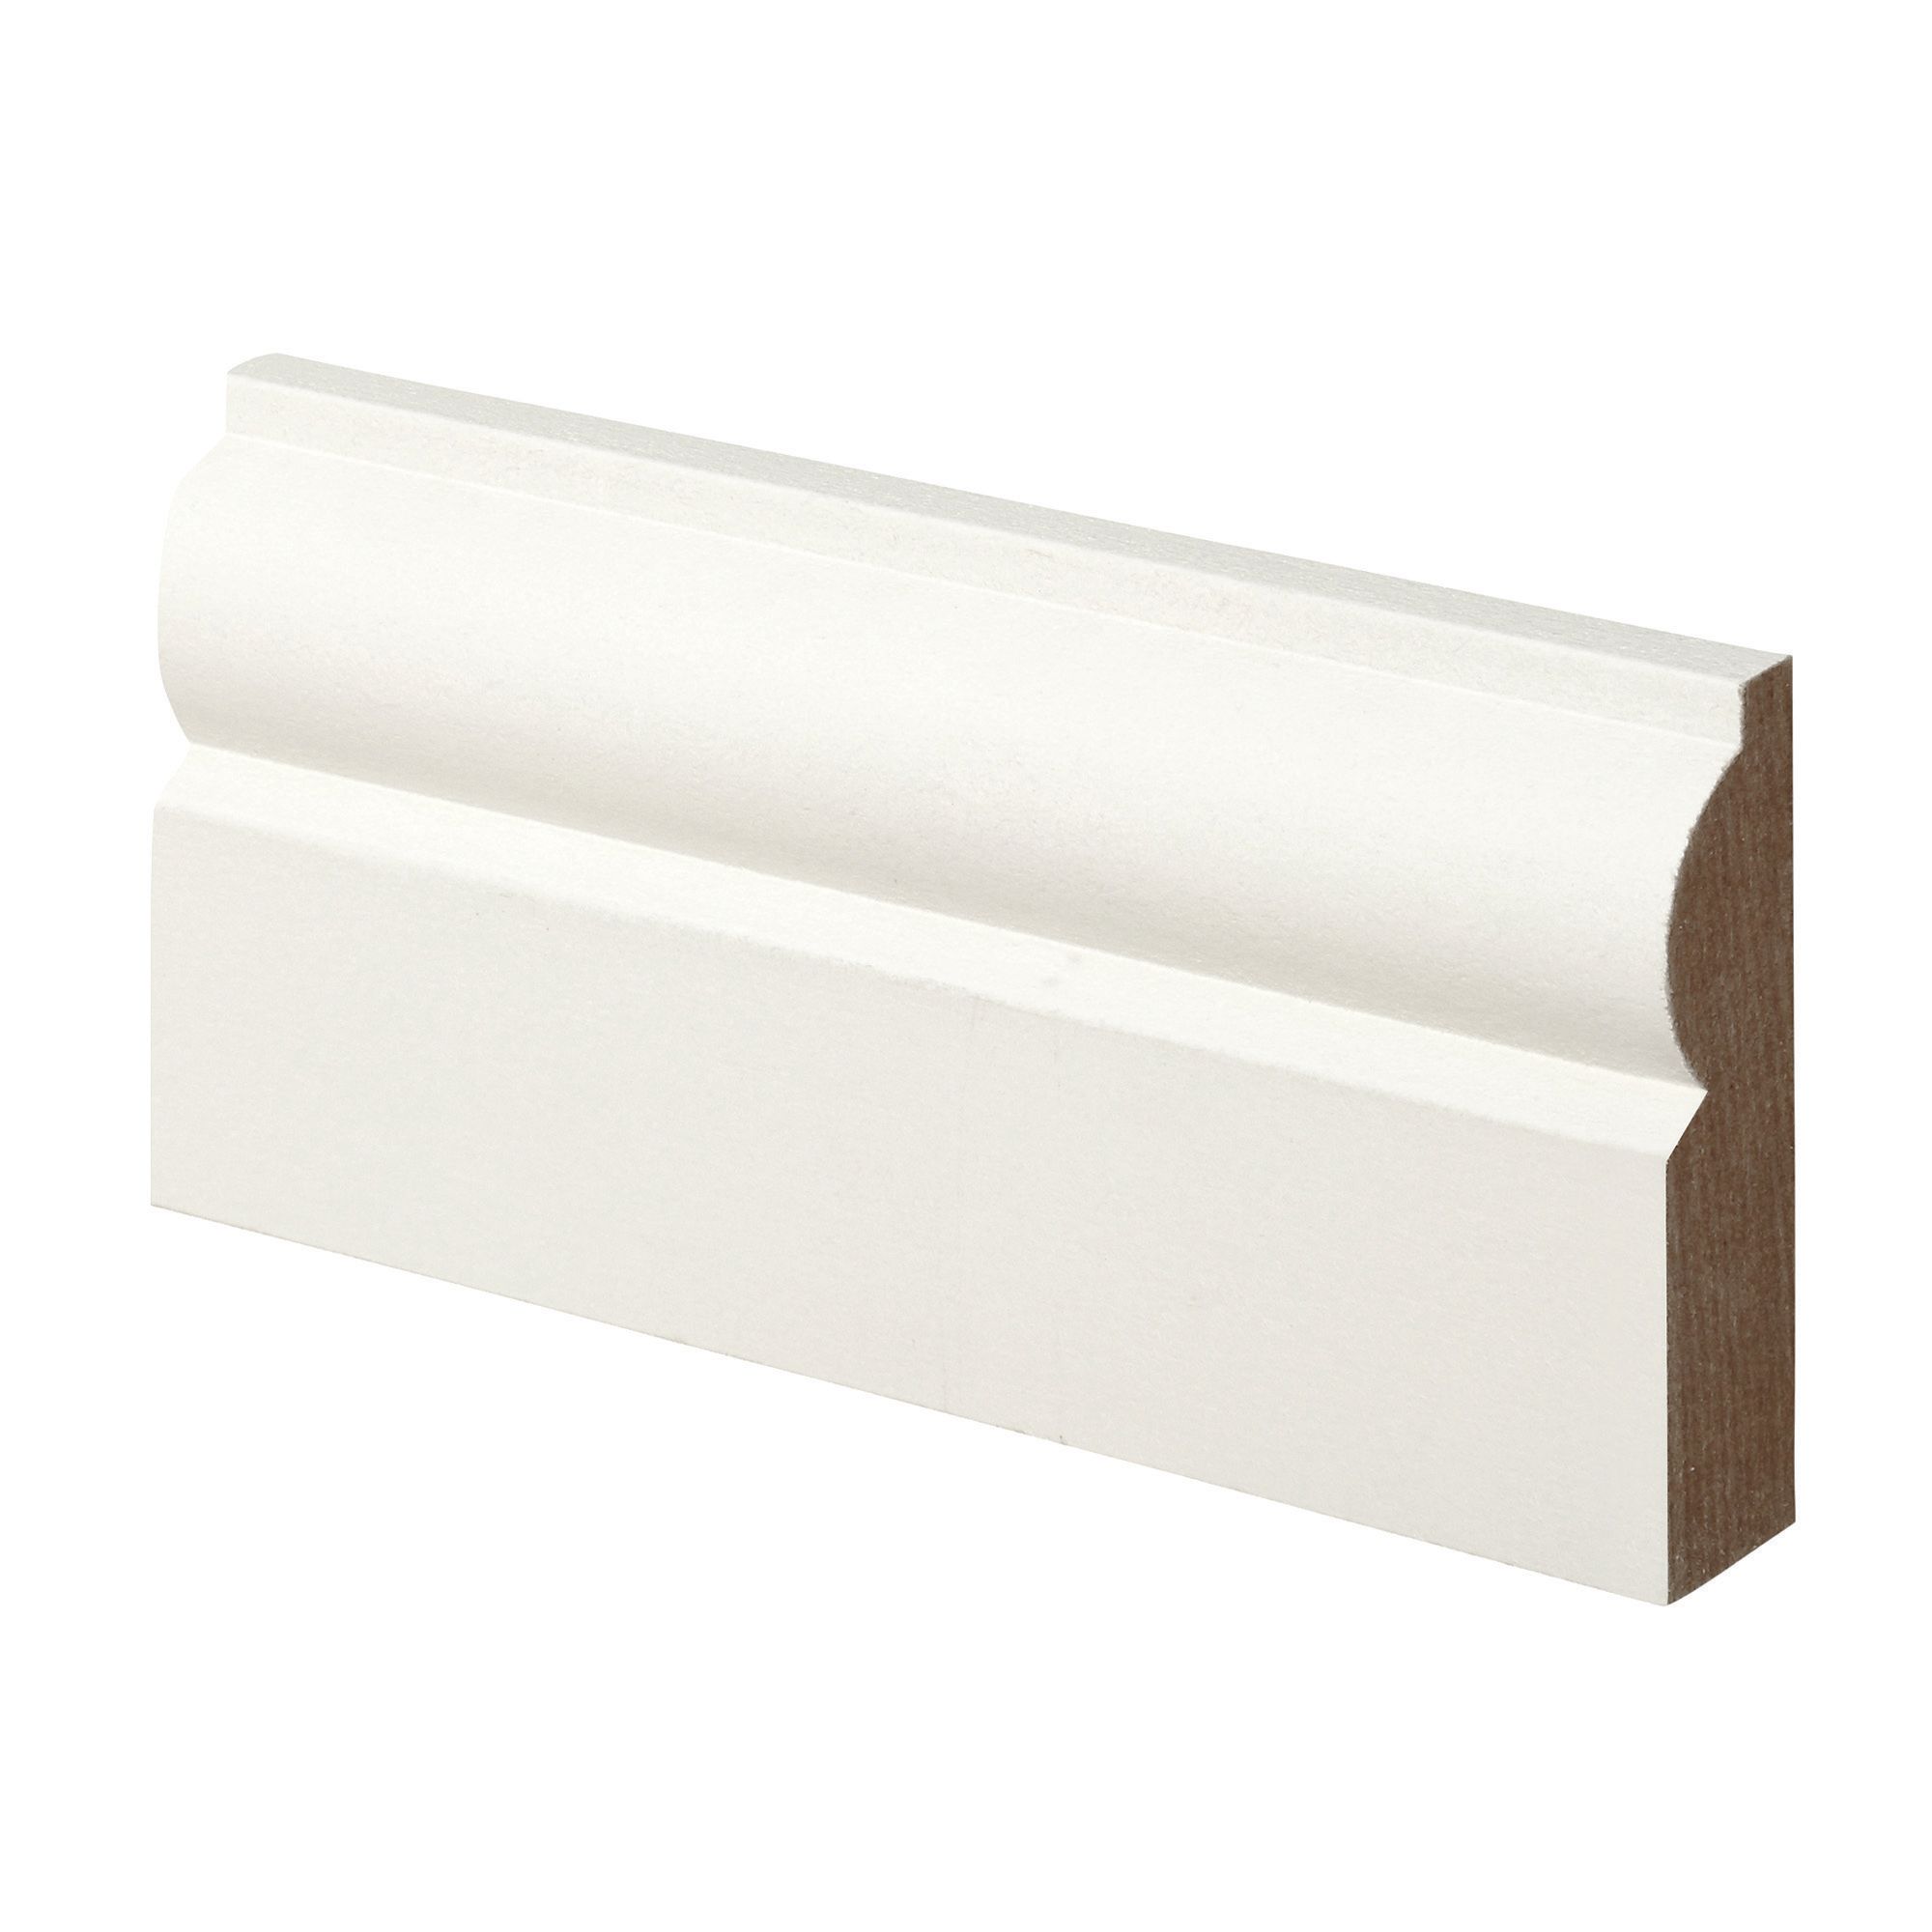 Image of Wickes Torus Primed MDF Architrave - 18mm x 69mm x 2.1m Pack of 5